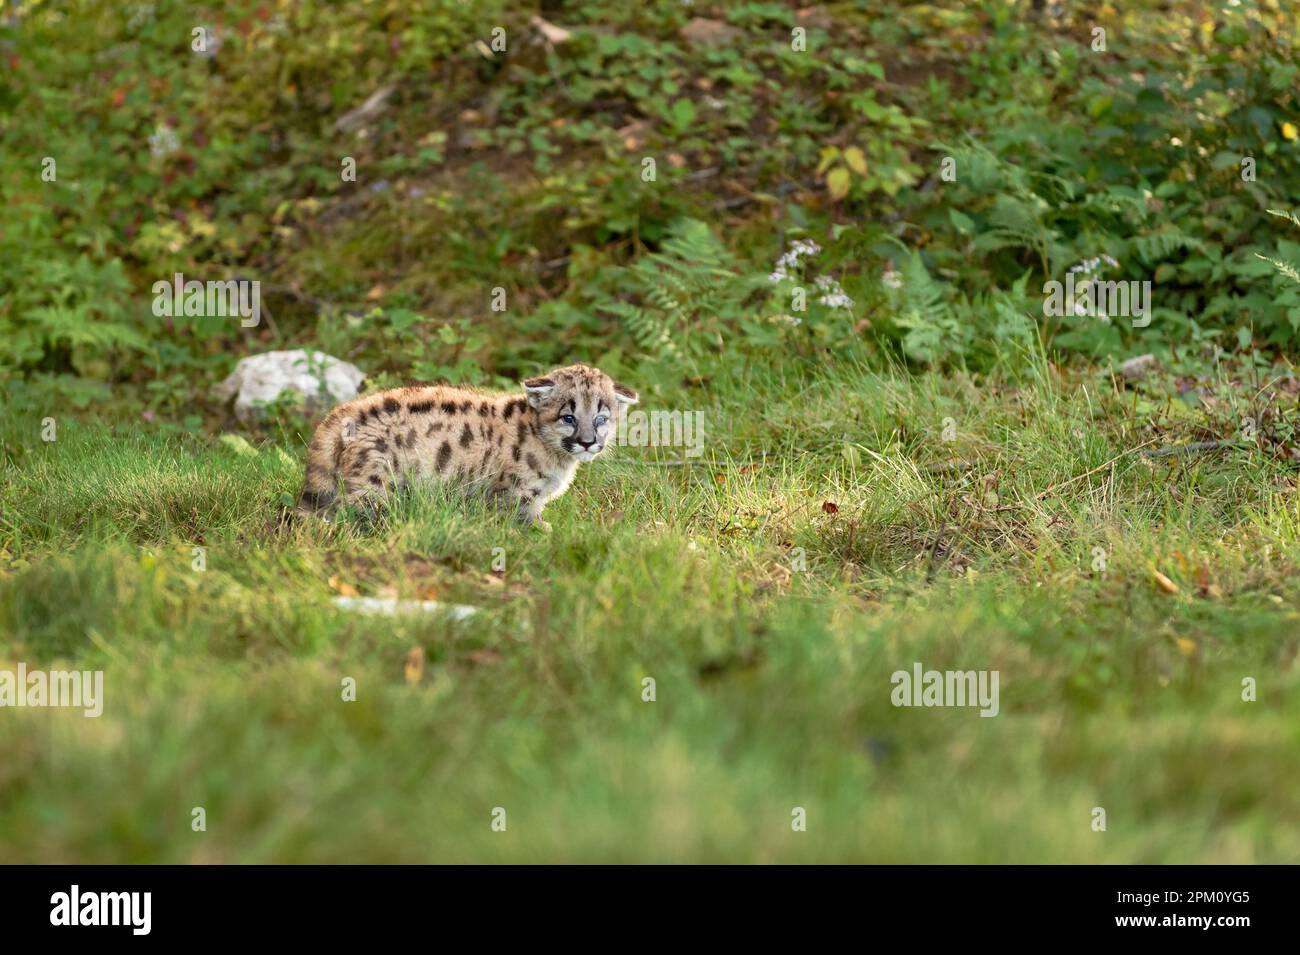 Cougar Kitten (Puma concolor) Stands Alone in Grass Looking Out Autumn - captive animal Stock Photo